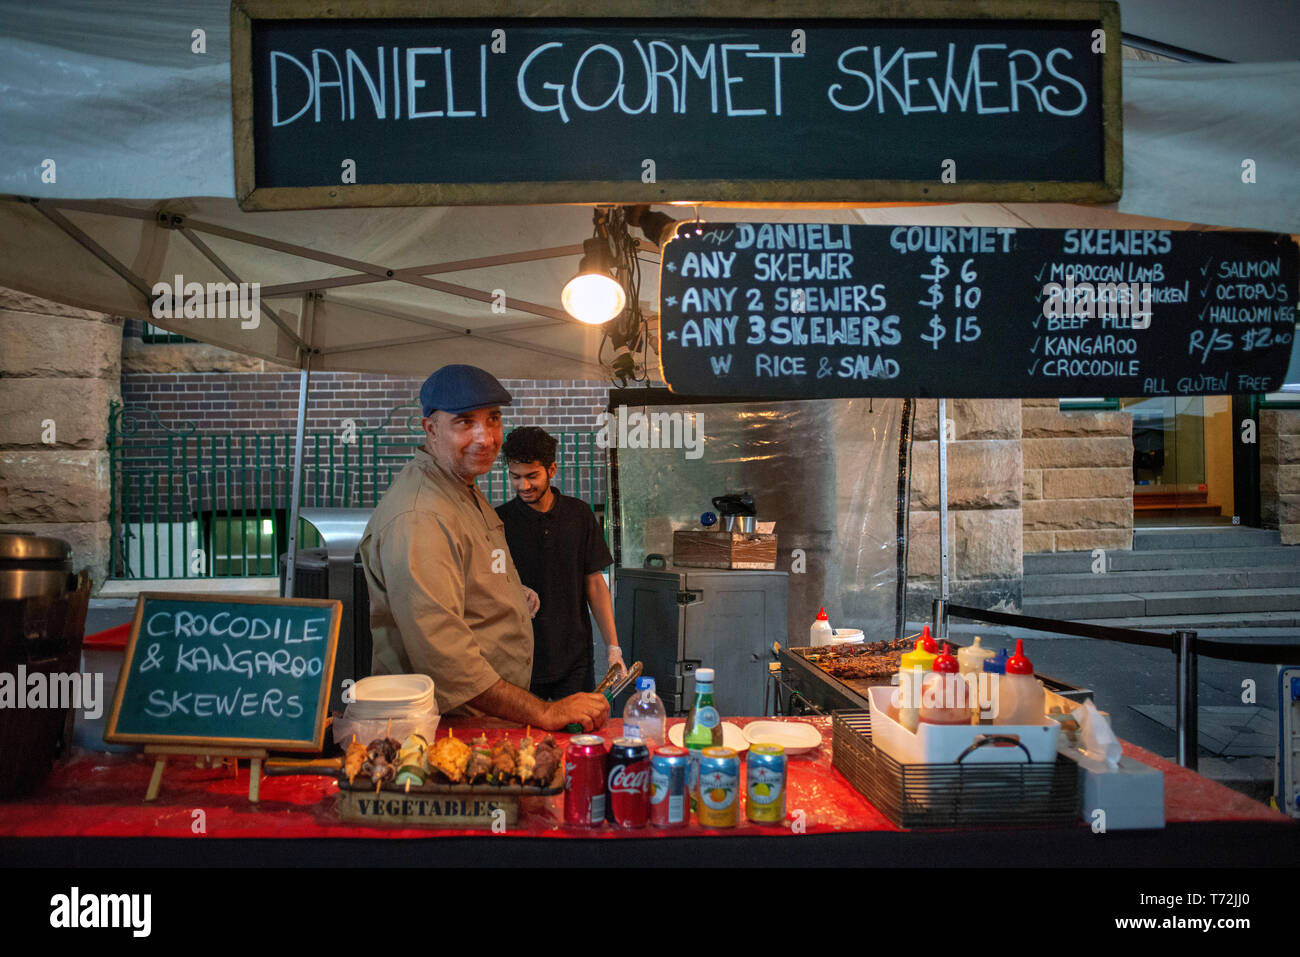 Danieli Gourmet Skewers food stall at The Rocks Saturday markets in Sydney city centre New South Wales Australia Stock Photo